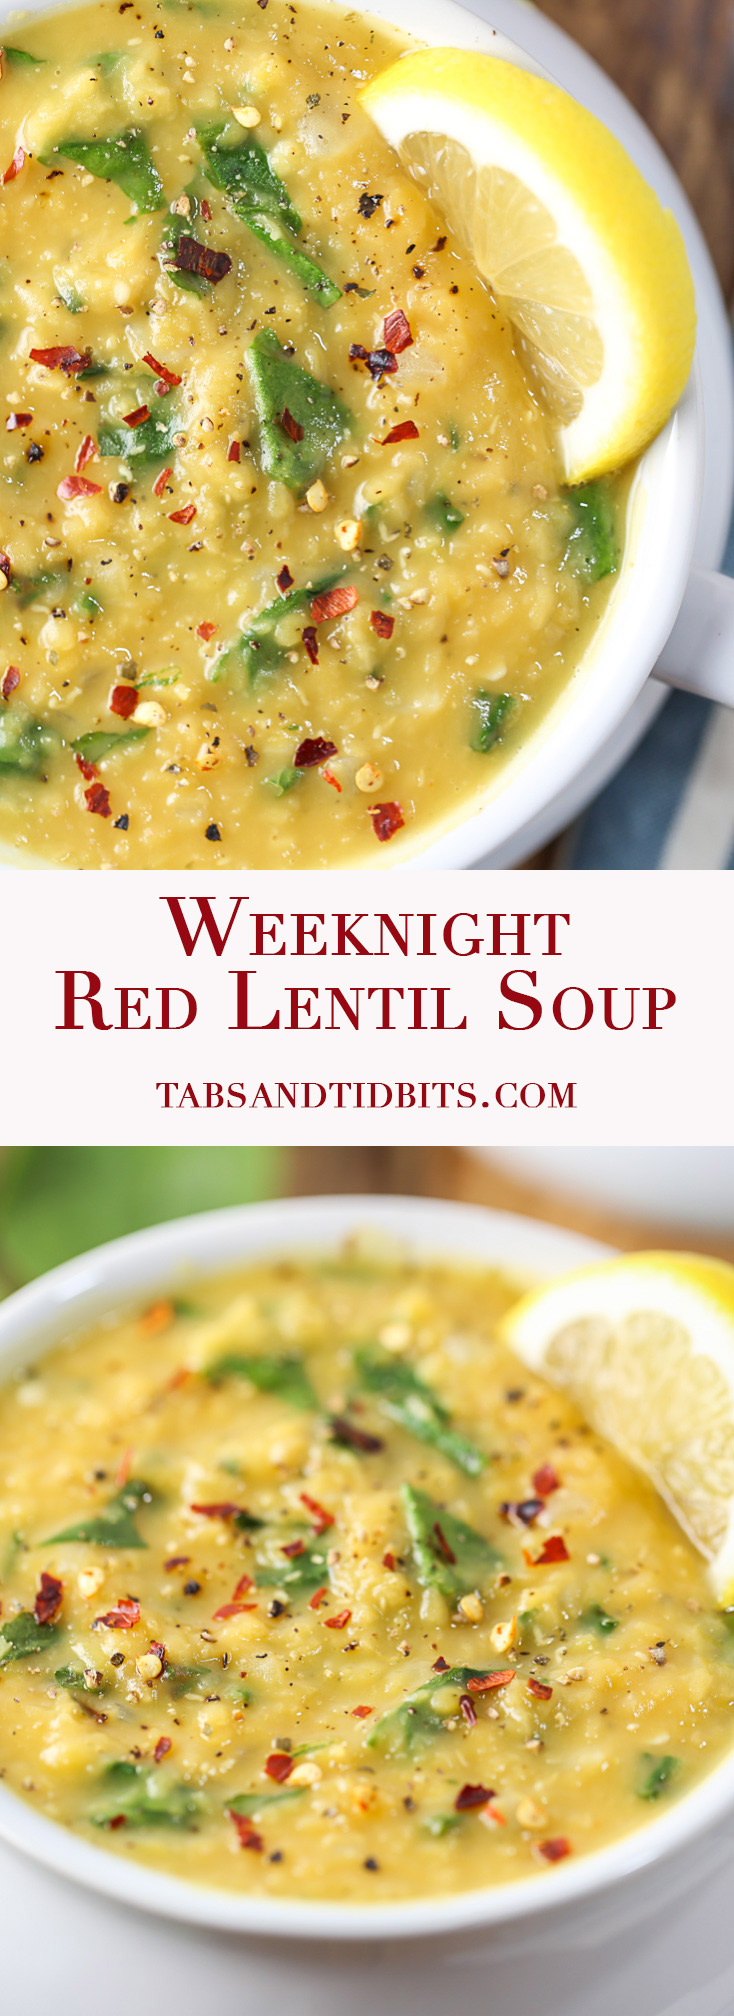 Weeknight Red Lentil Soup - A simple yet delicious uncomplicated soup that is vegan and vegetarian-friendly!